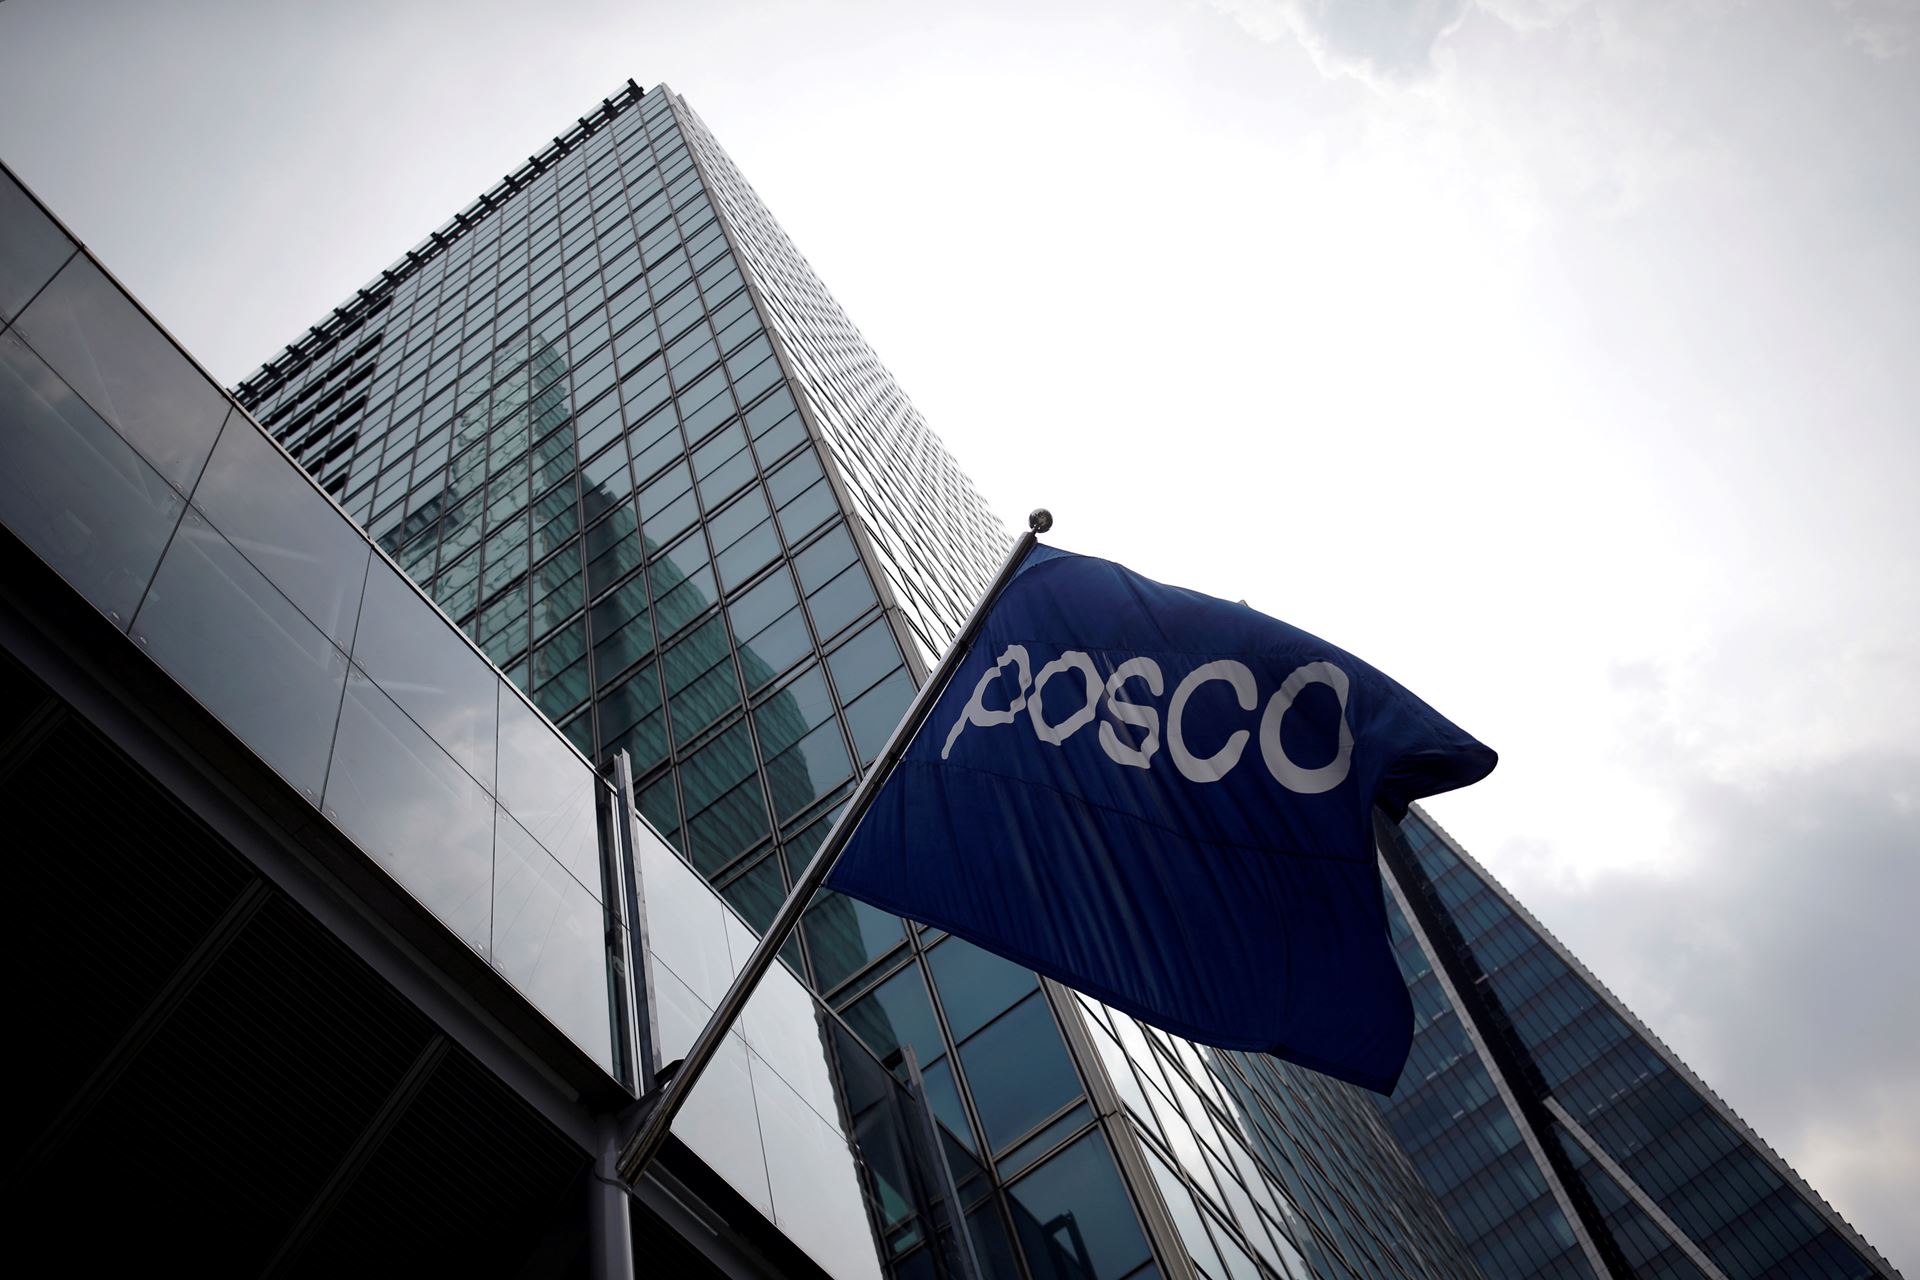 Posco and IBK aim to revive Indonesia's steel industry